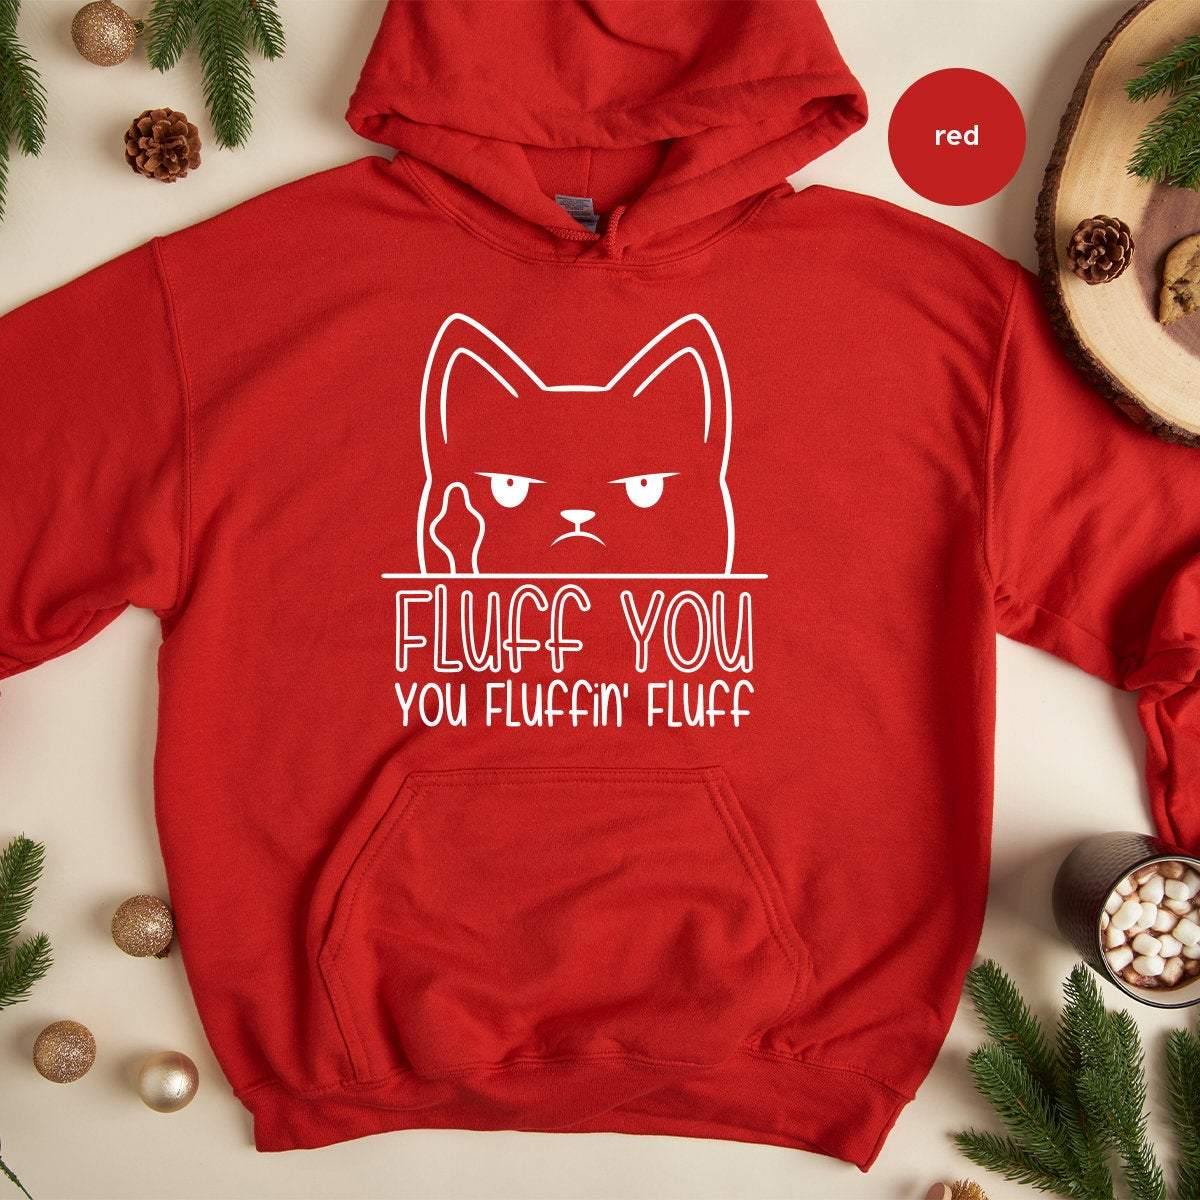 Funny Women Hoodies, Funny Cat Hoodie, Funny Saying Hoodie, Funny Sarcastic Hoodies, Humorous Hoodie, Fluff You You Fluffin Fluff Hoodies - Fastdeliverytees.com